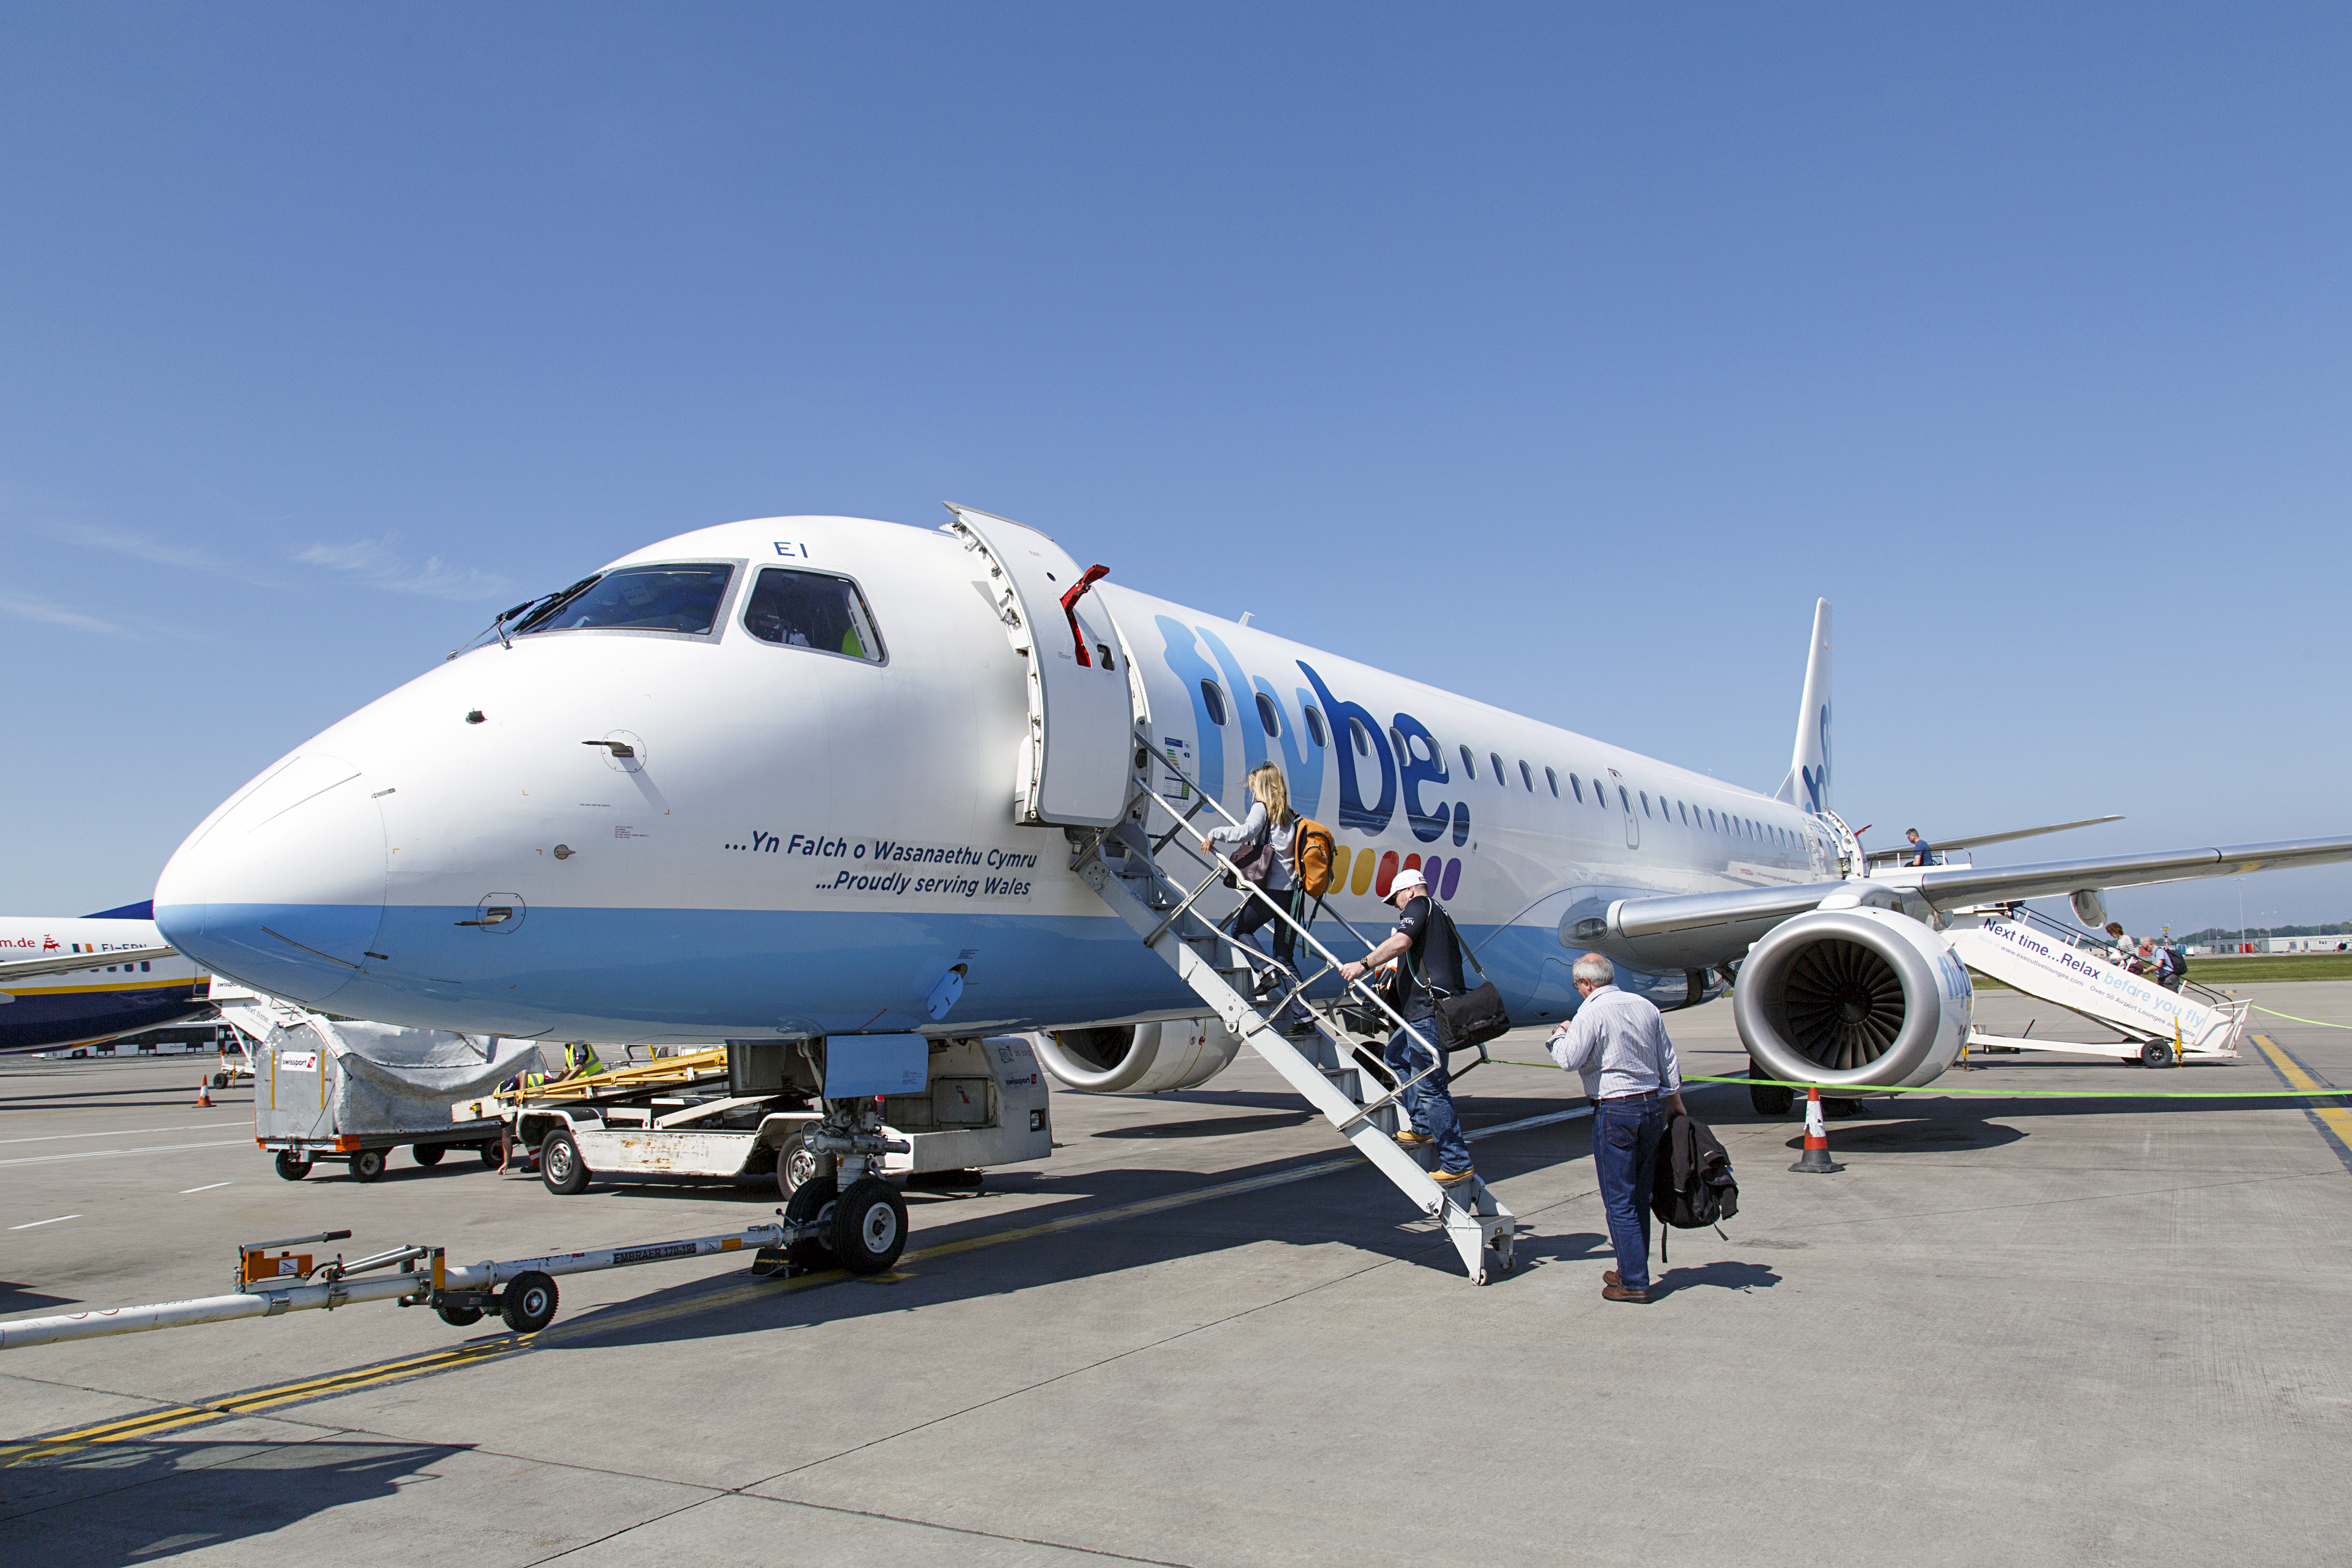 Edinburgh, UK: May 29, 2016: Passengers board a scheduled flight from Edinburgh to Cardiff. Flybe is the largest independent regional airline in Europe and is based in Exeter.